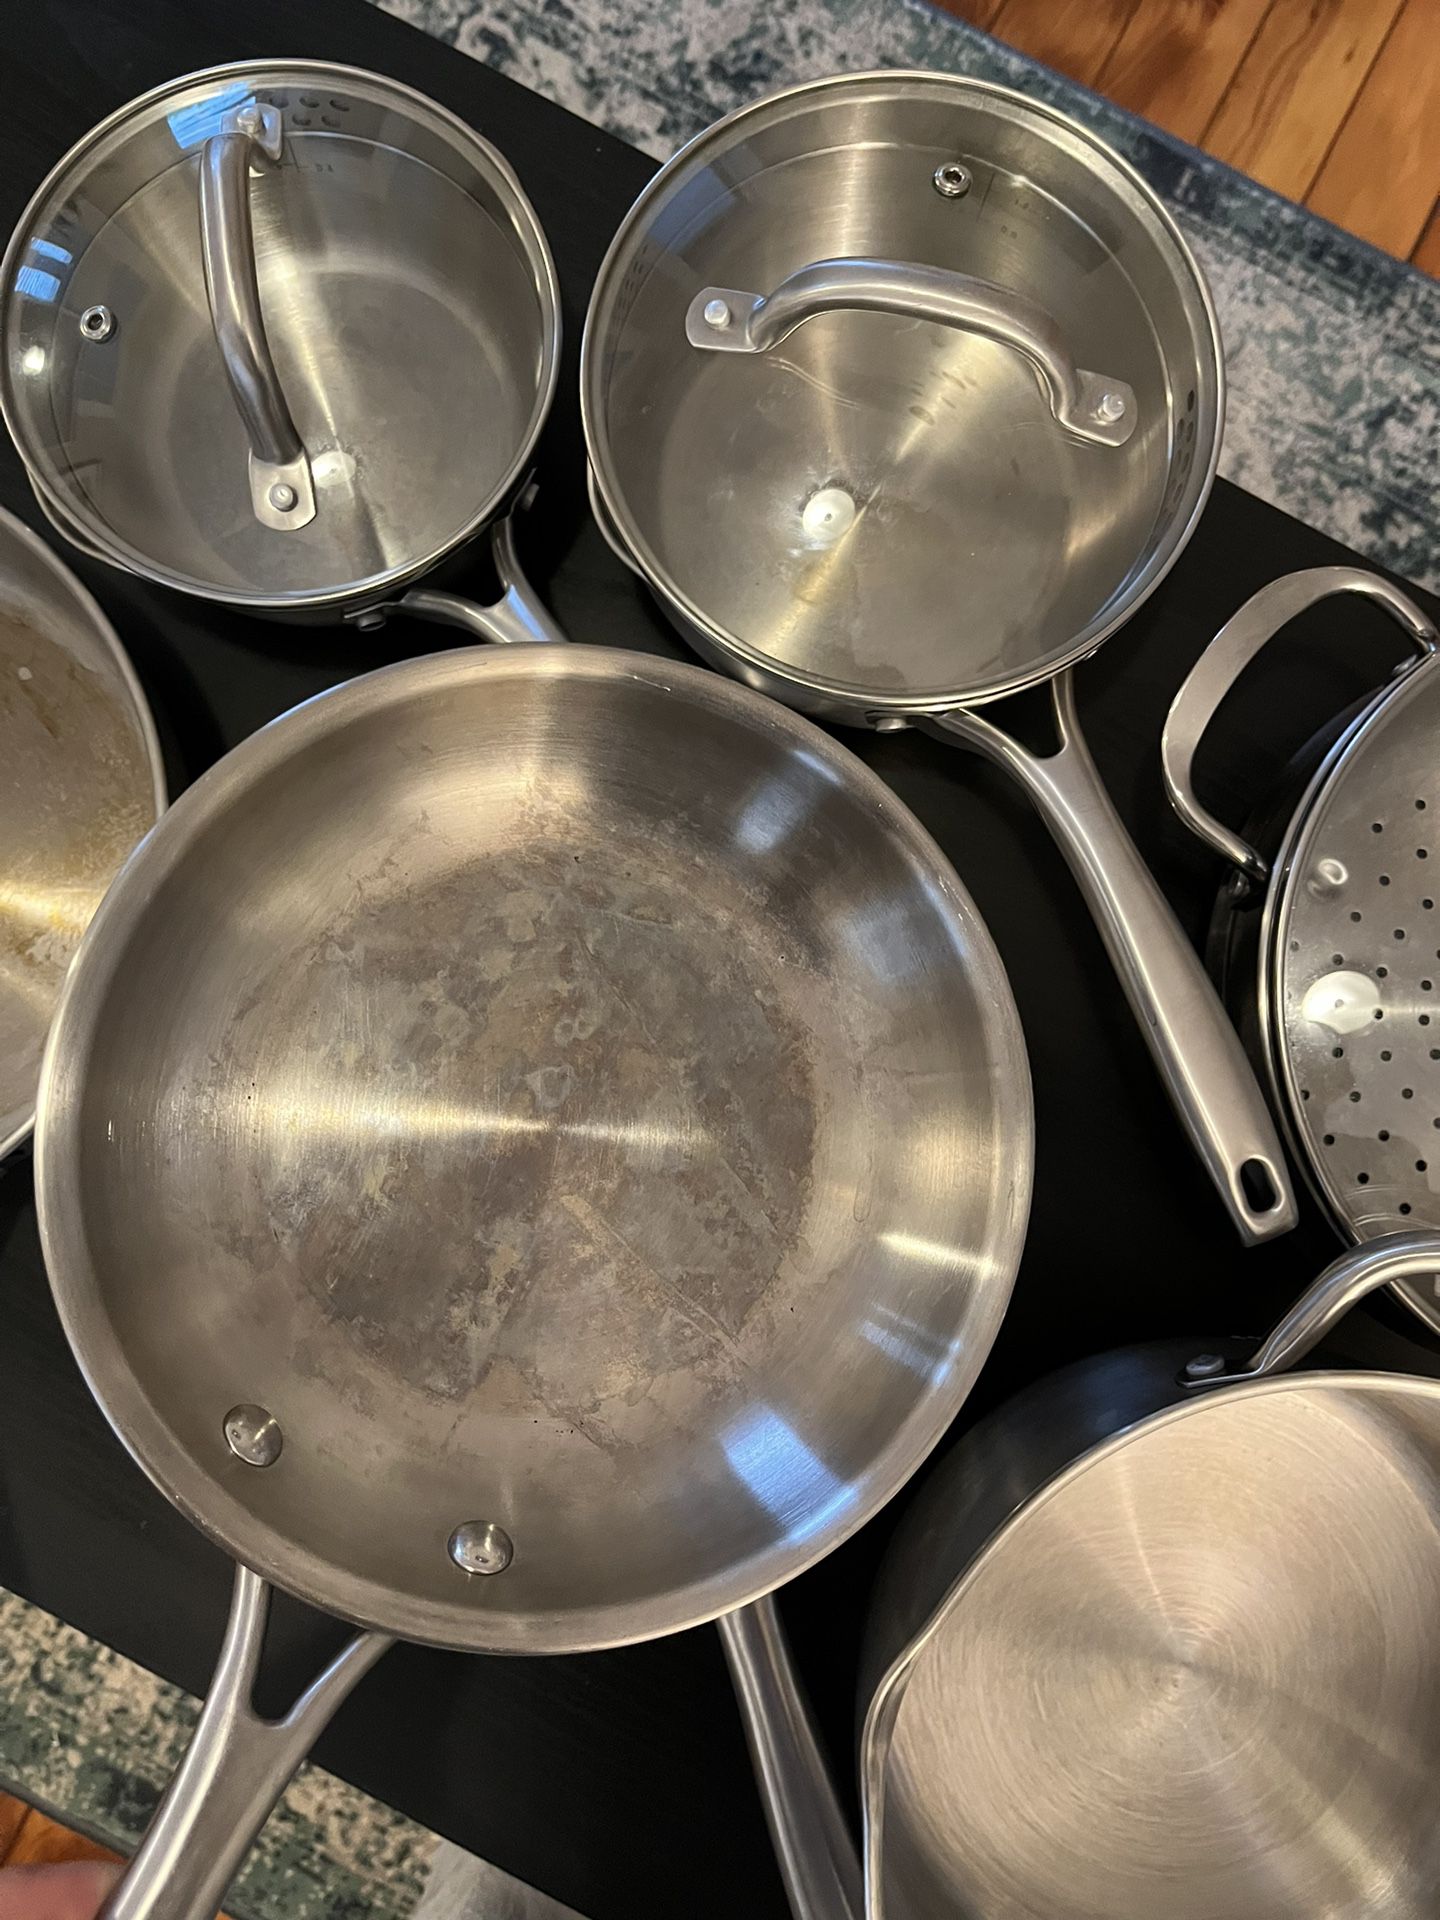 New Calphalon Tri-Ply Stainless Steel 13-Piece Cookware Set for Sale in  Cornelius, NC - OfferUp